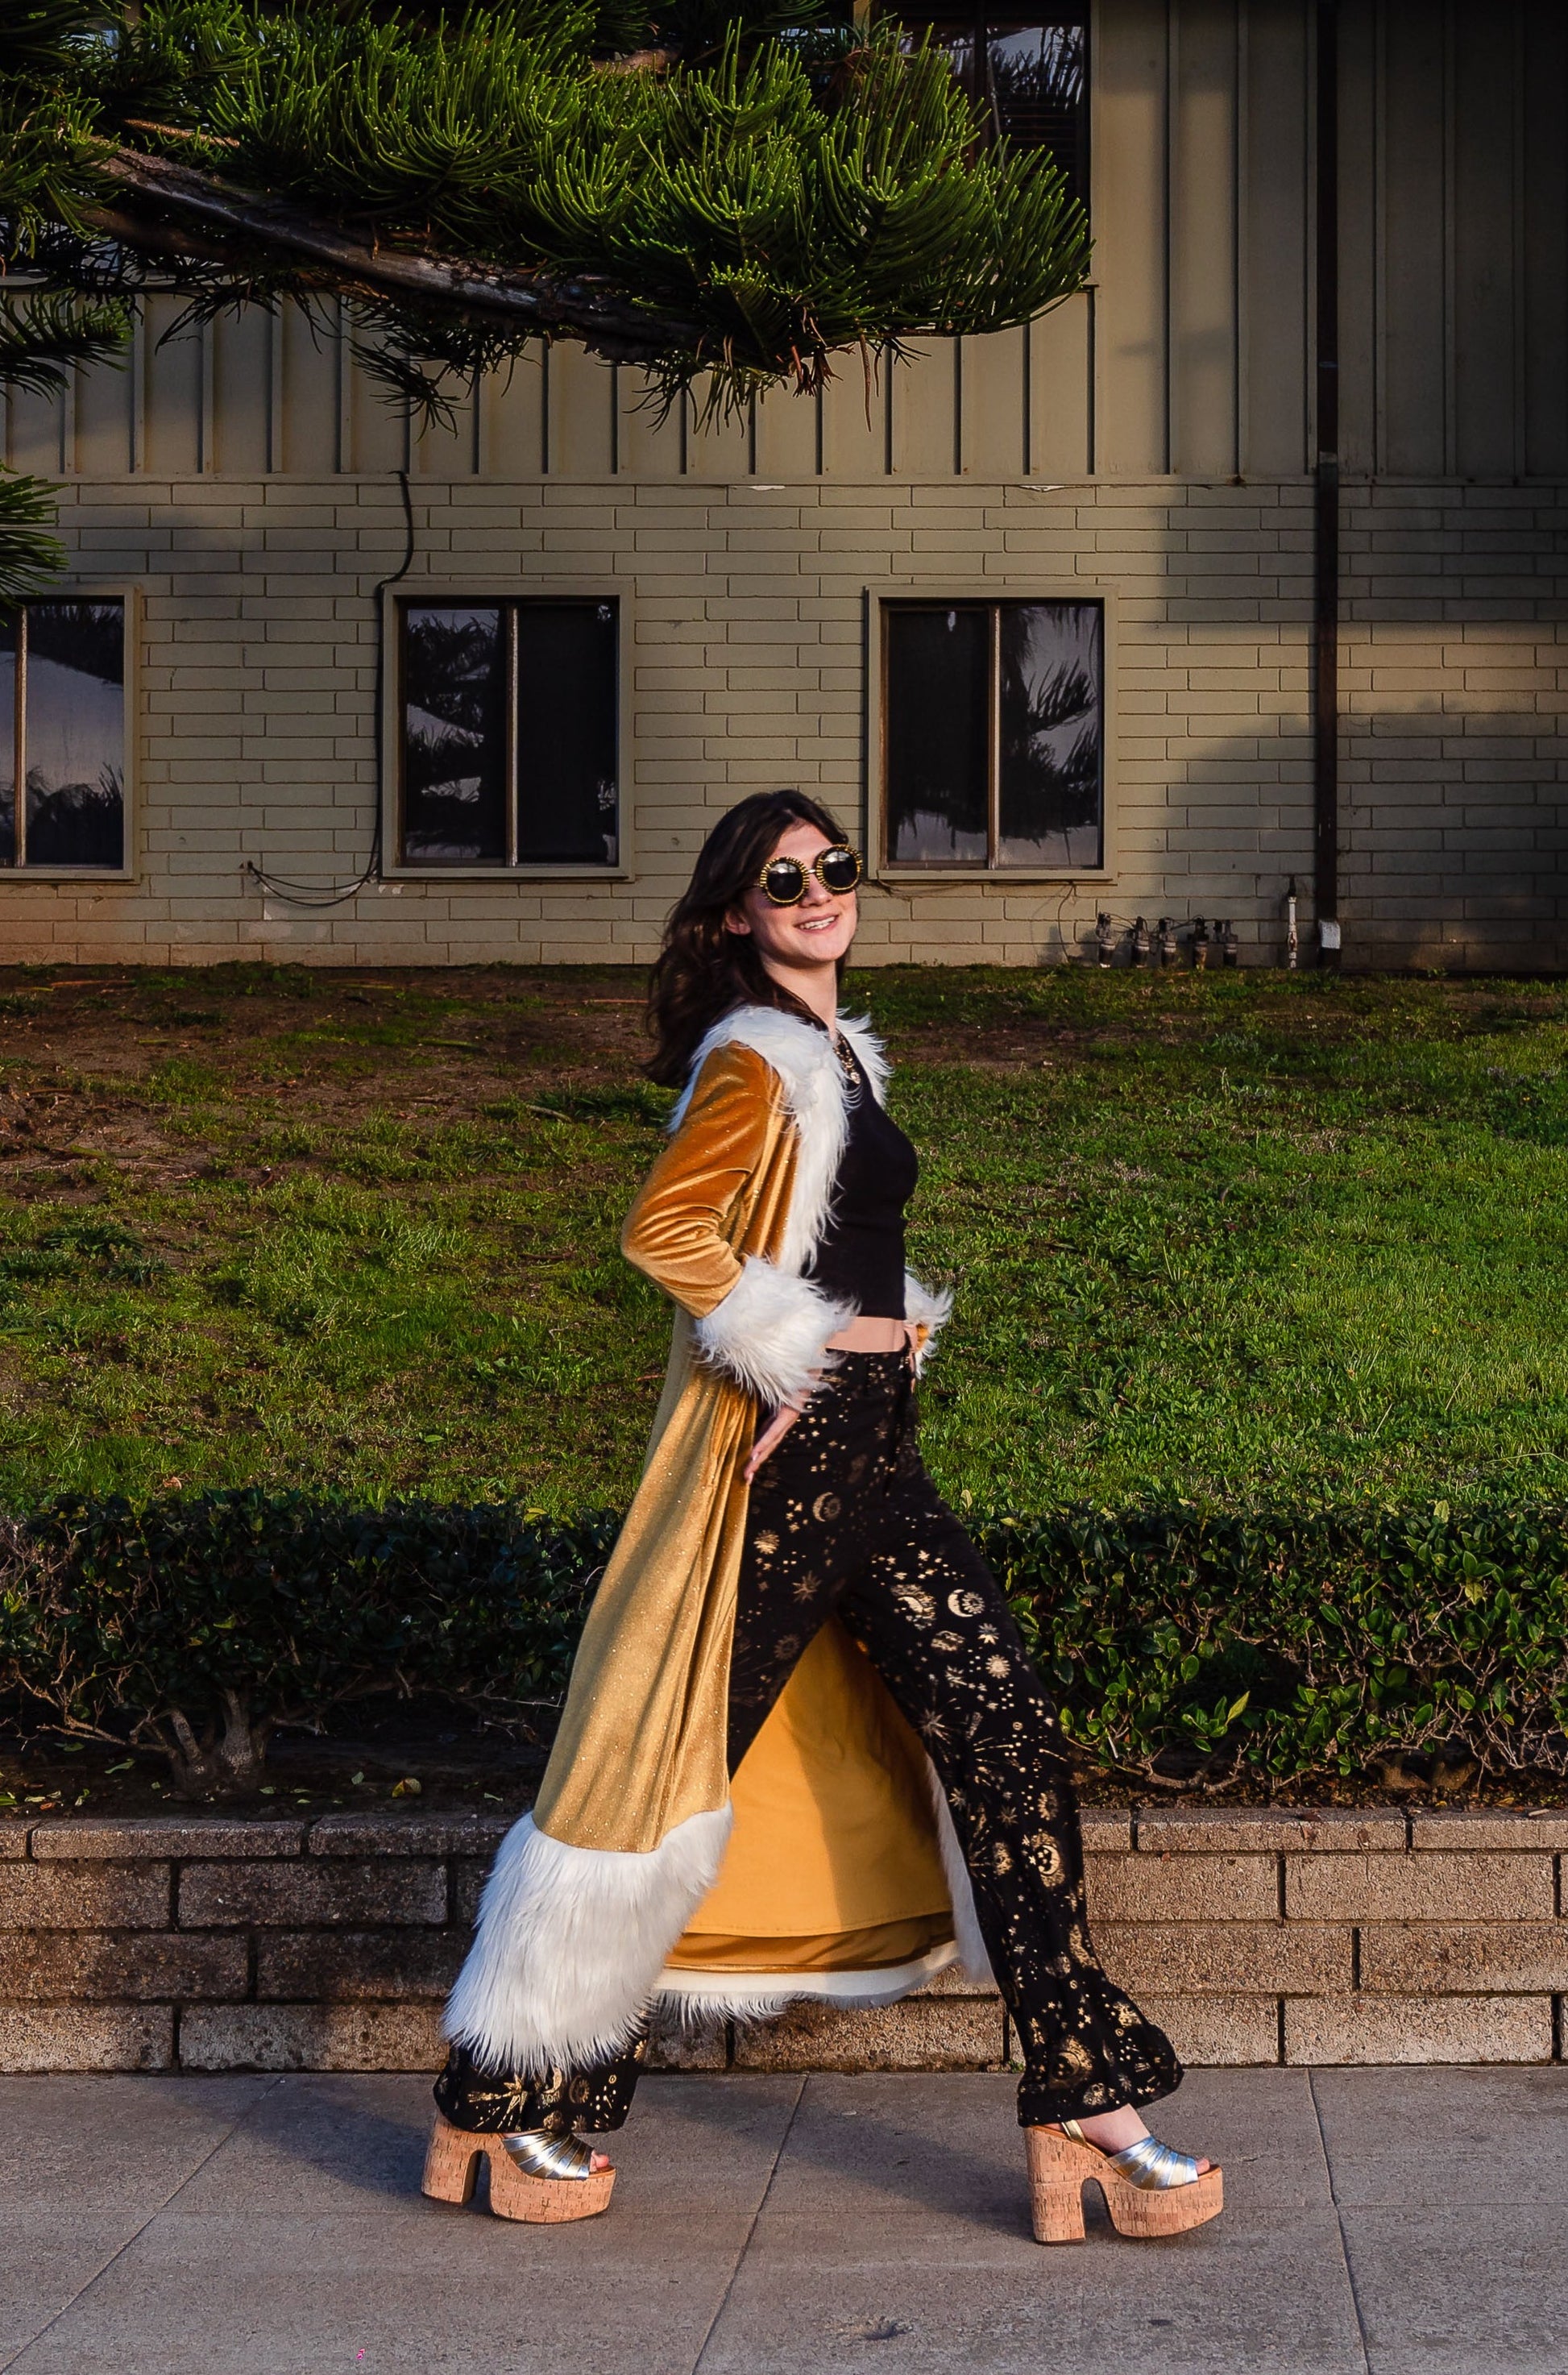 Long, penny lane style trench coat fashioned from a shimmering mustard gold velvet.Embellished with long, ivory white faux fur along collar, lapel, cuffs, and hem. Retro 70s aesthetic.